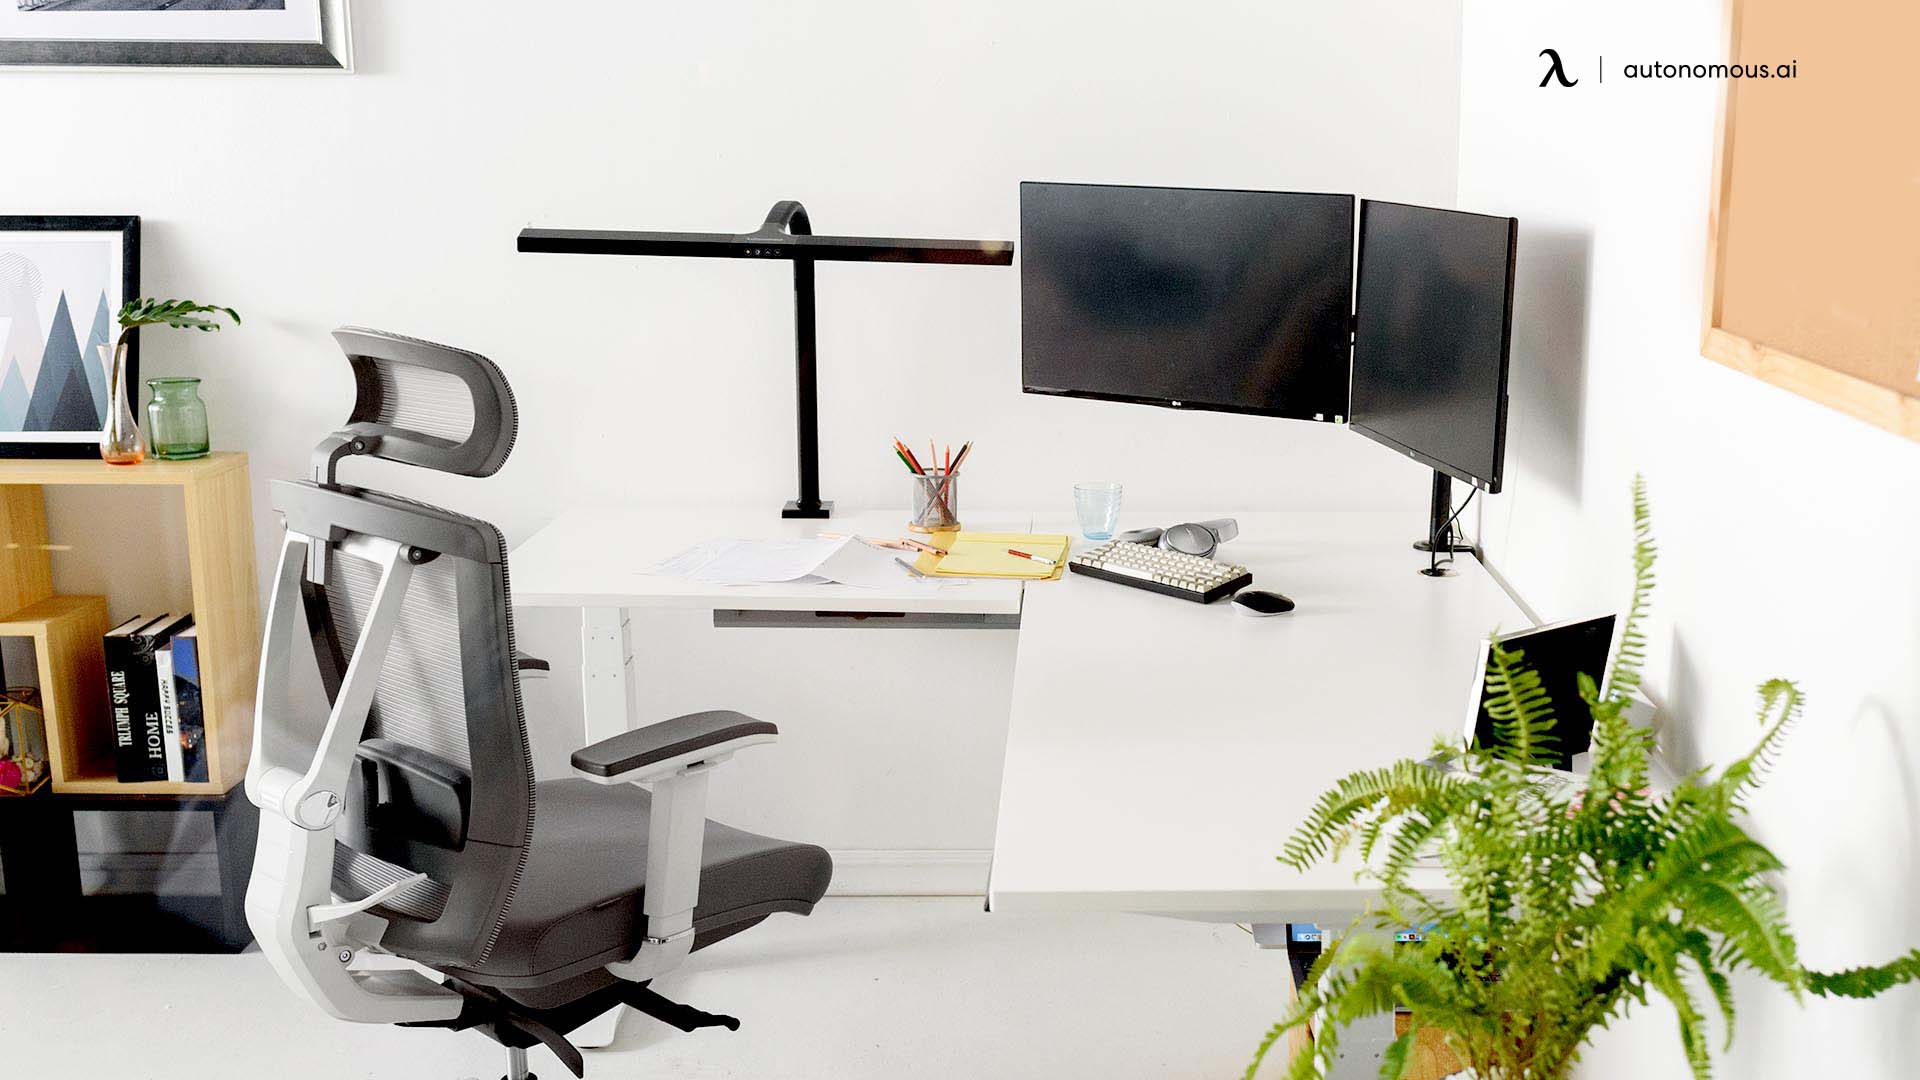 Why L-shaped Desks Work Well for the Home Office